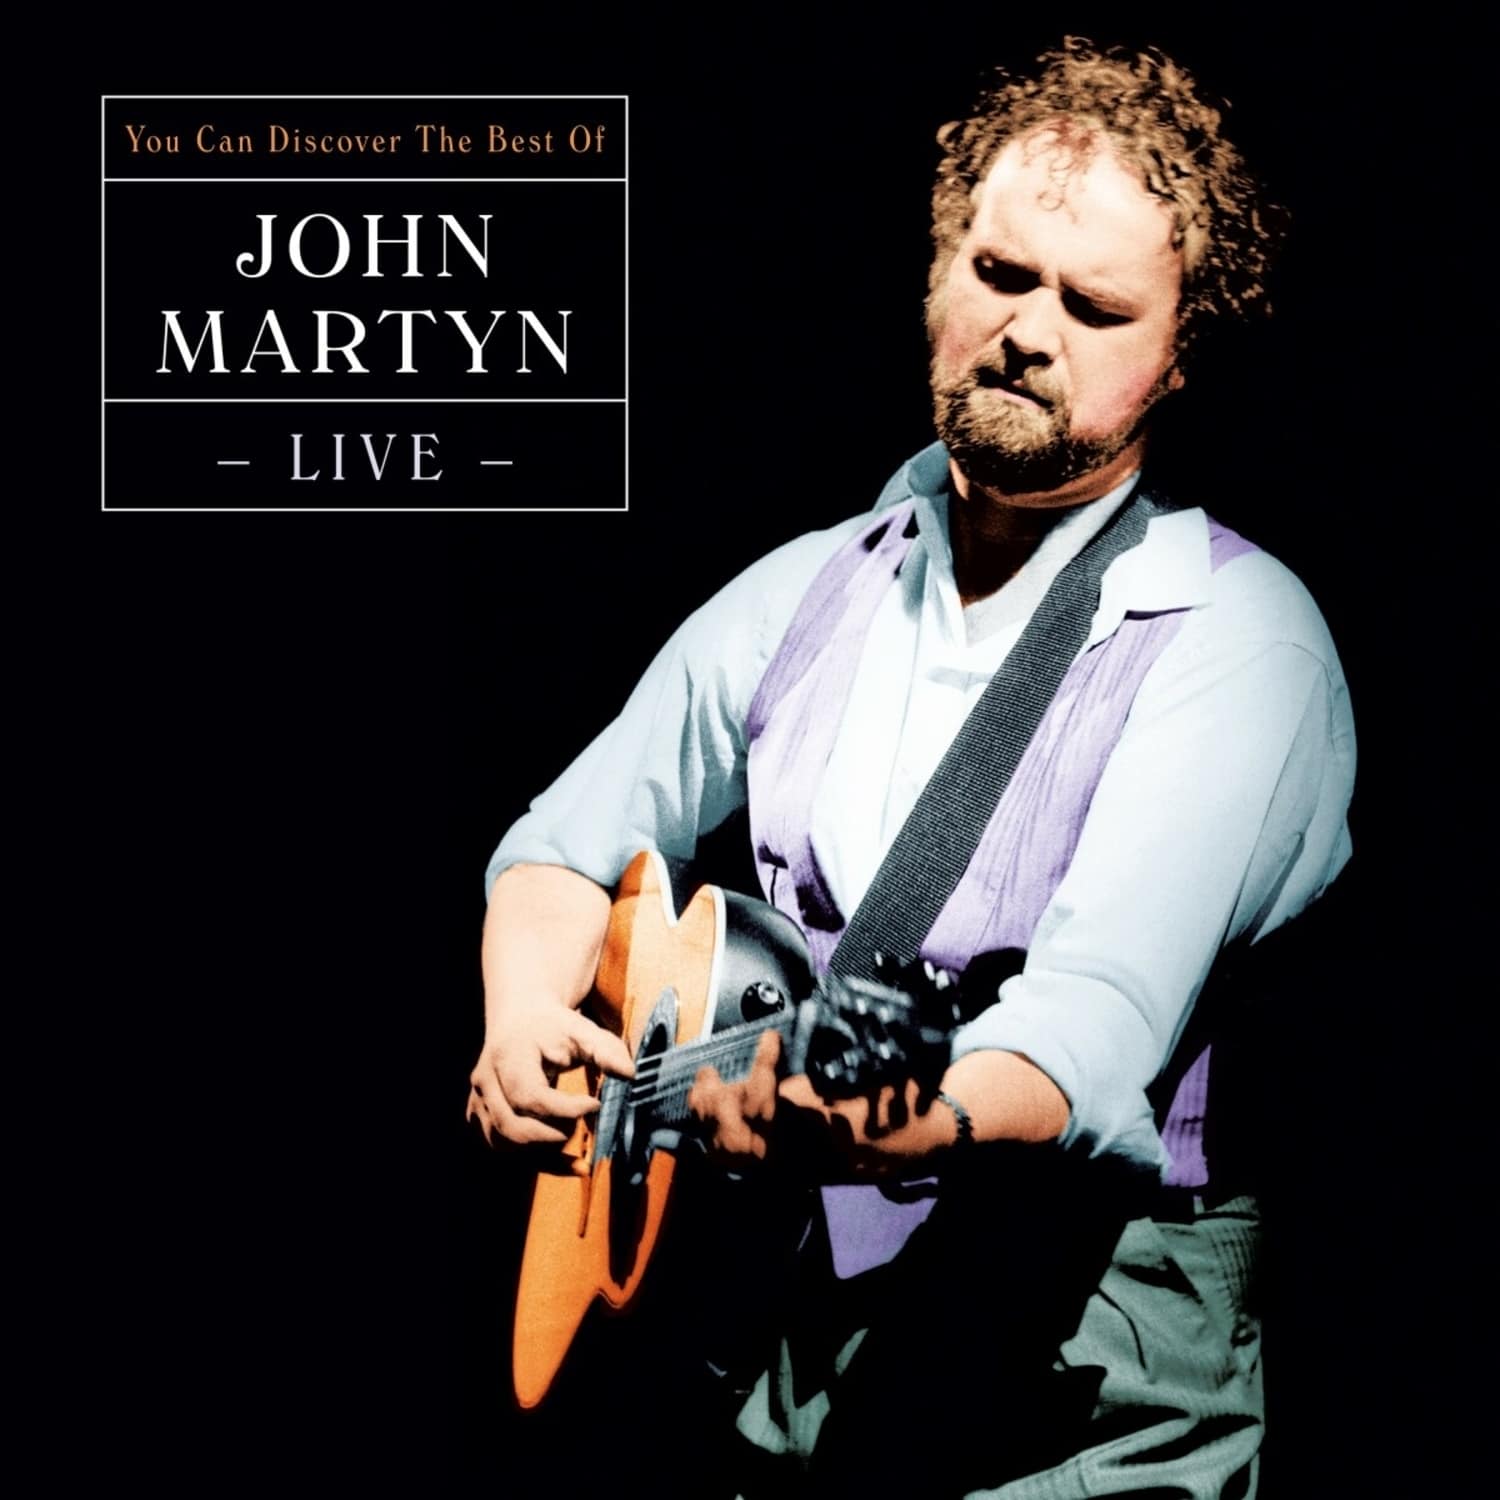 John Martyn - CAN YOU DISCOVER-BEST OF LIVE 